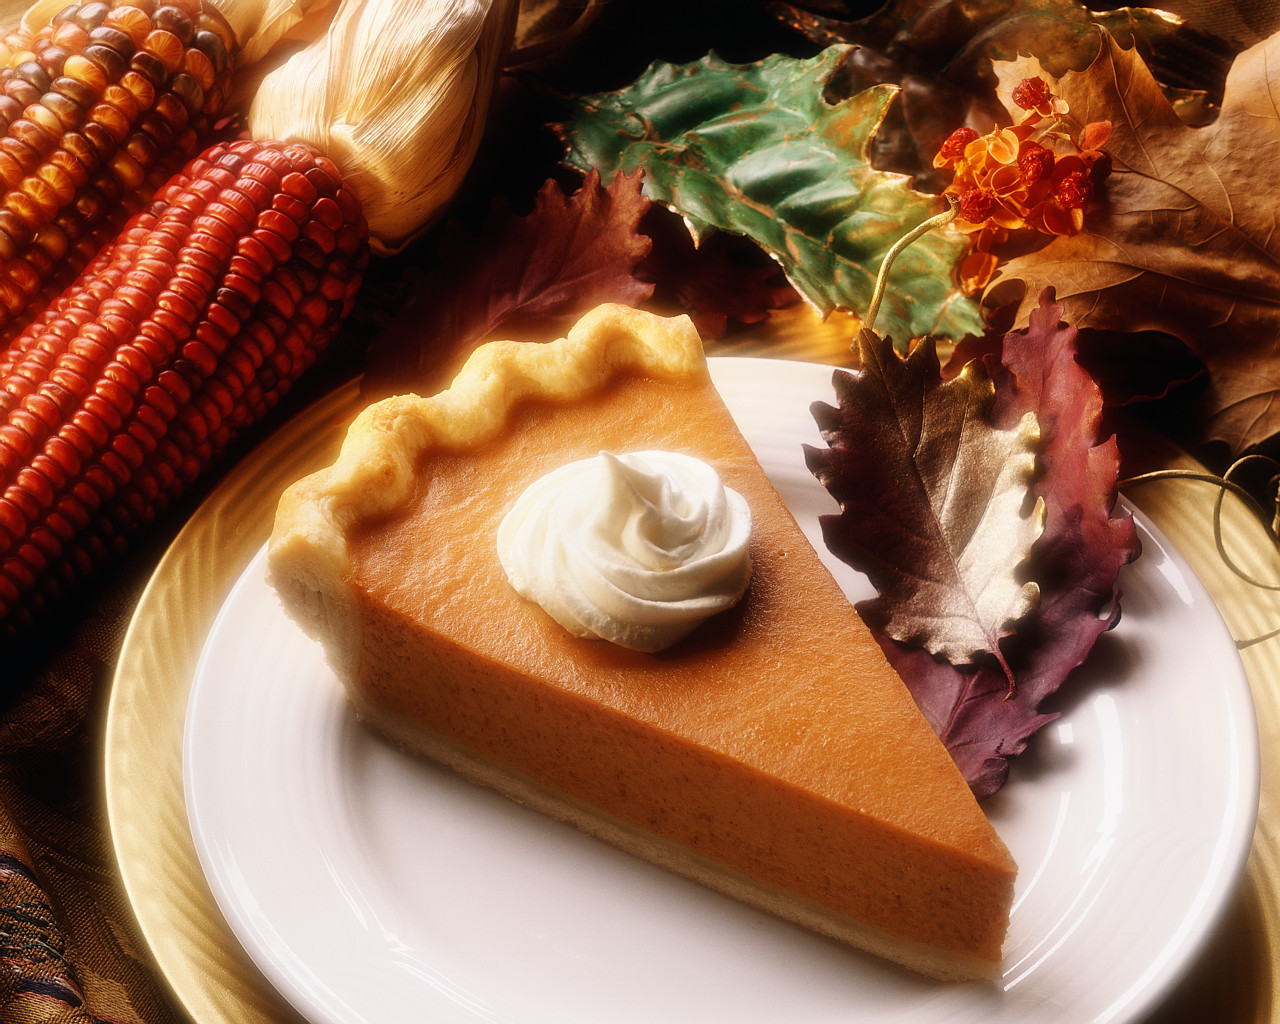 Pumpkin Pie Thanksgiving
 The Thanksgiving Dinner Plate Promoting Good Health with